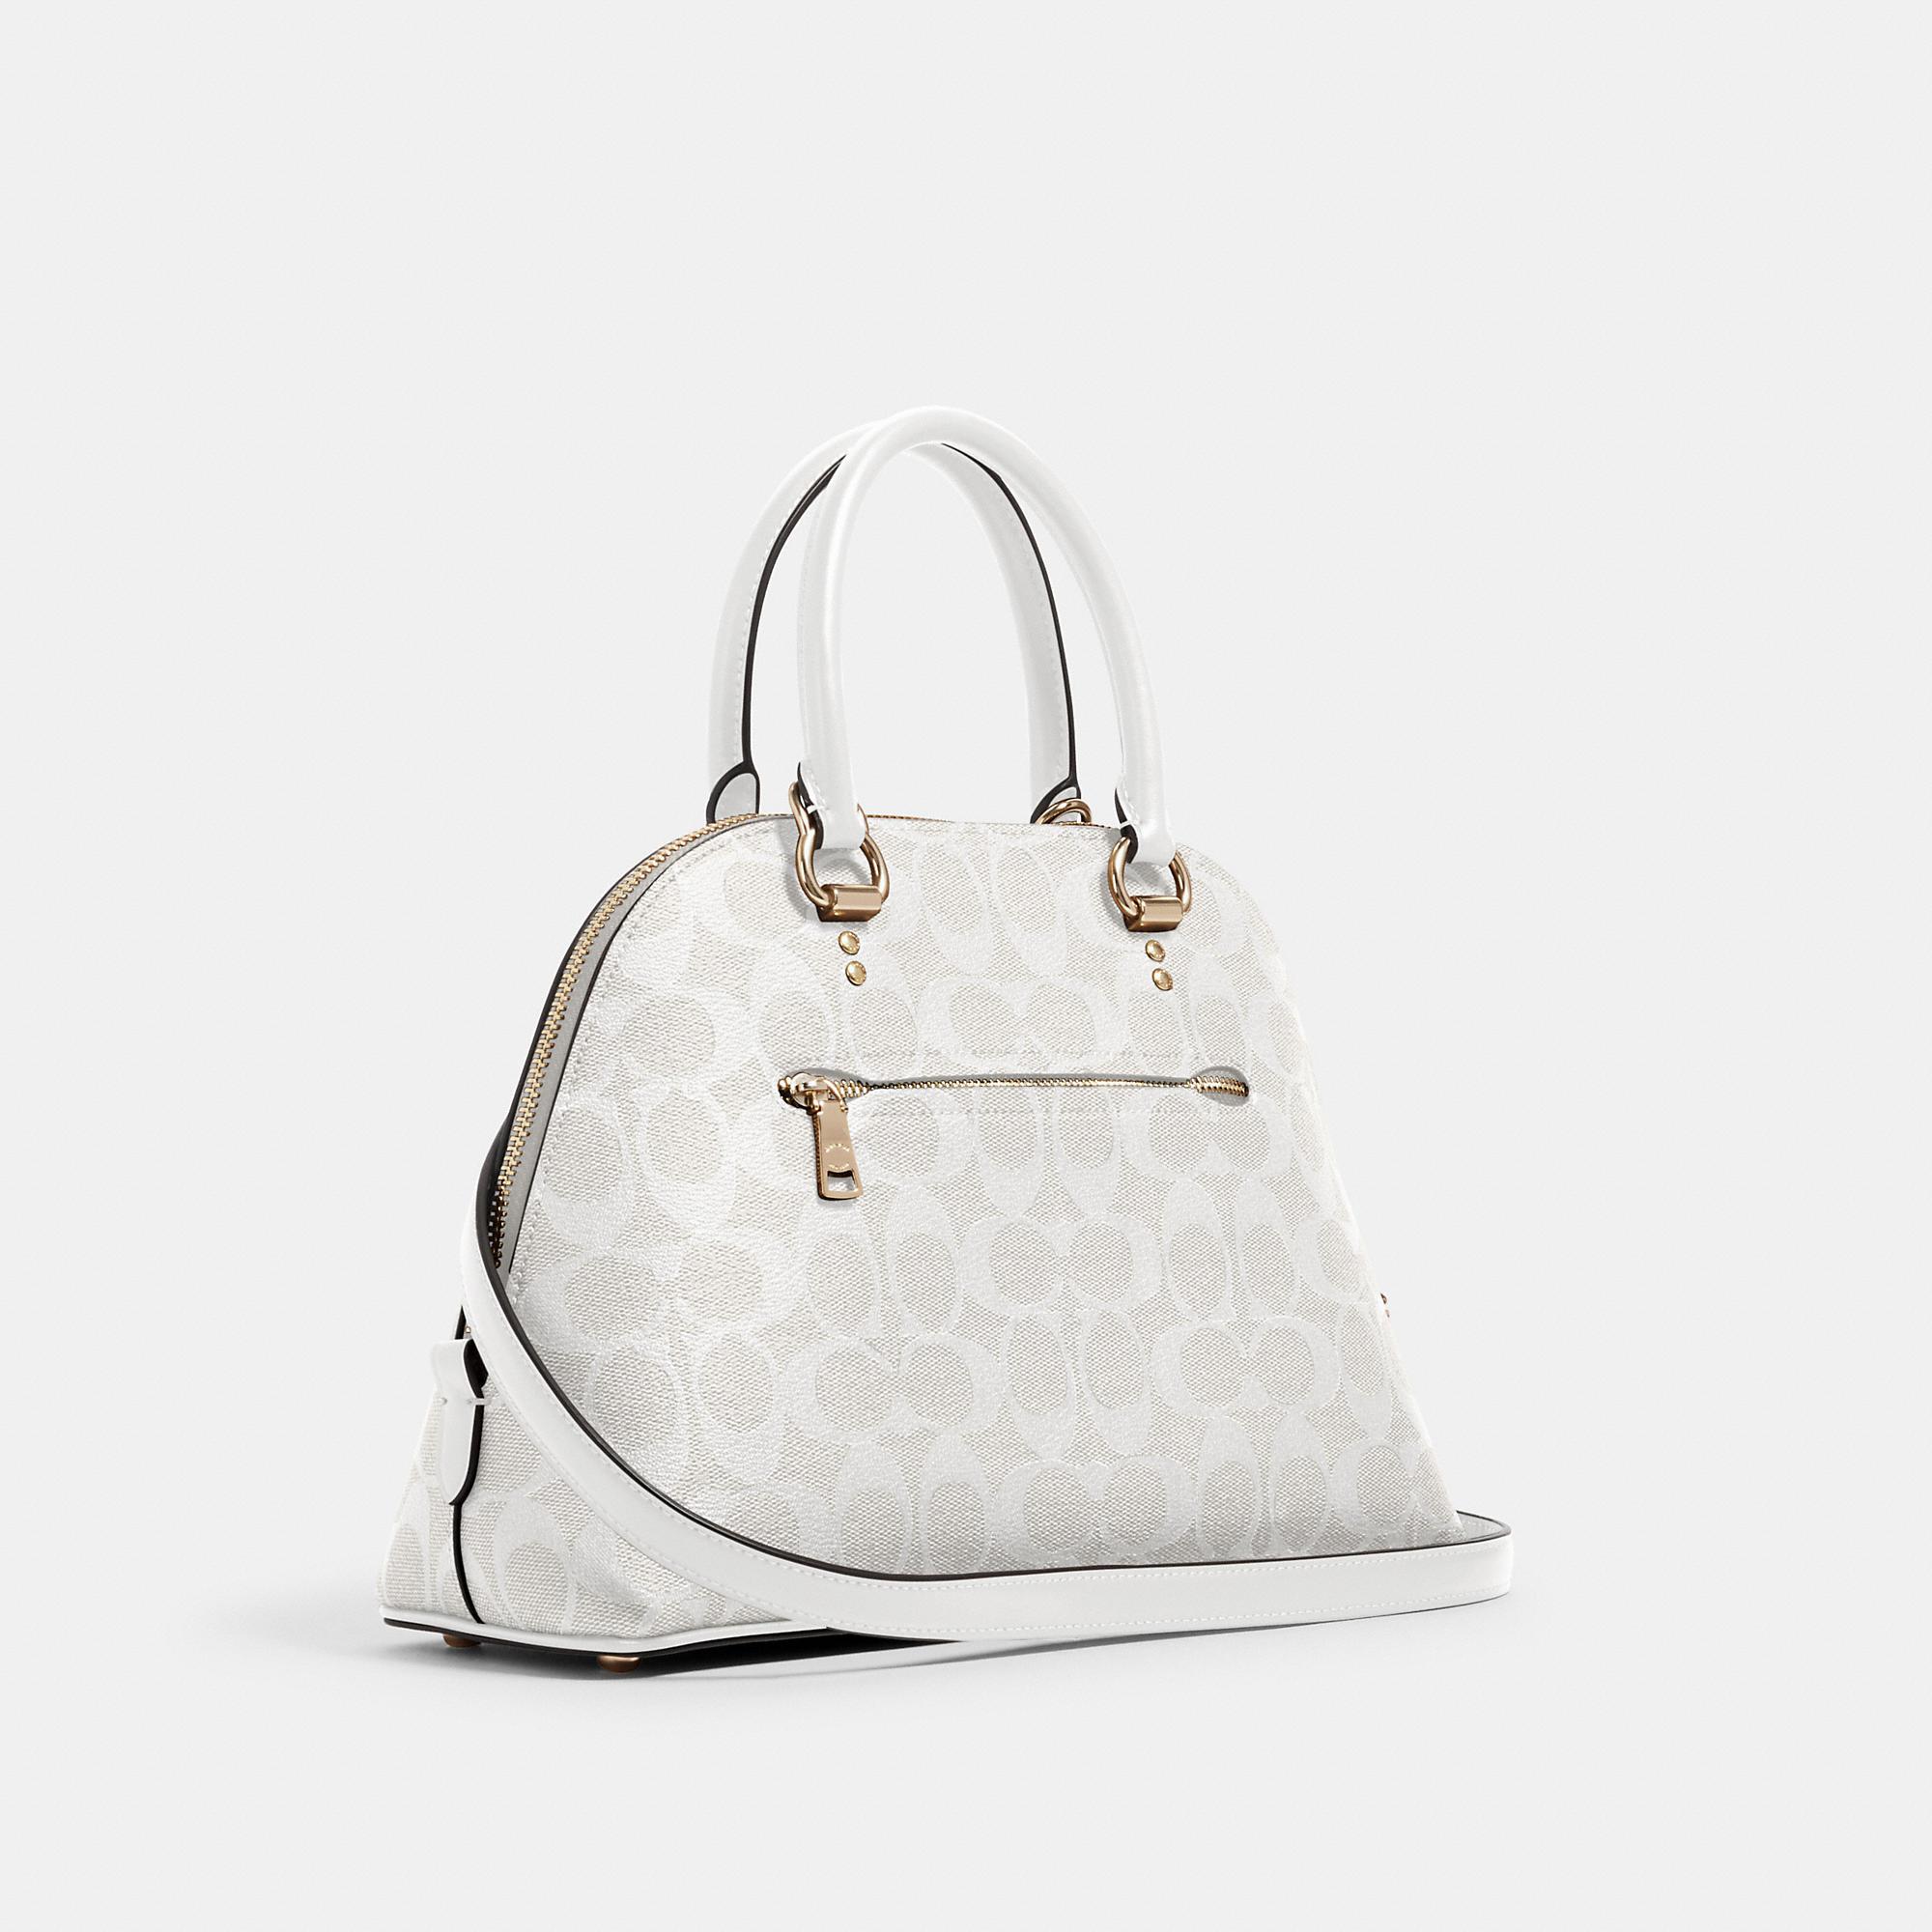 COACH Katy Satchel In Signature Canvas in White | Lyst